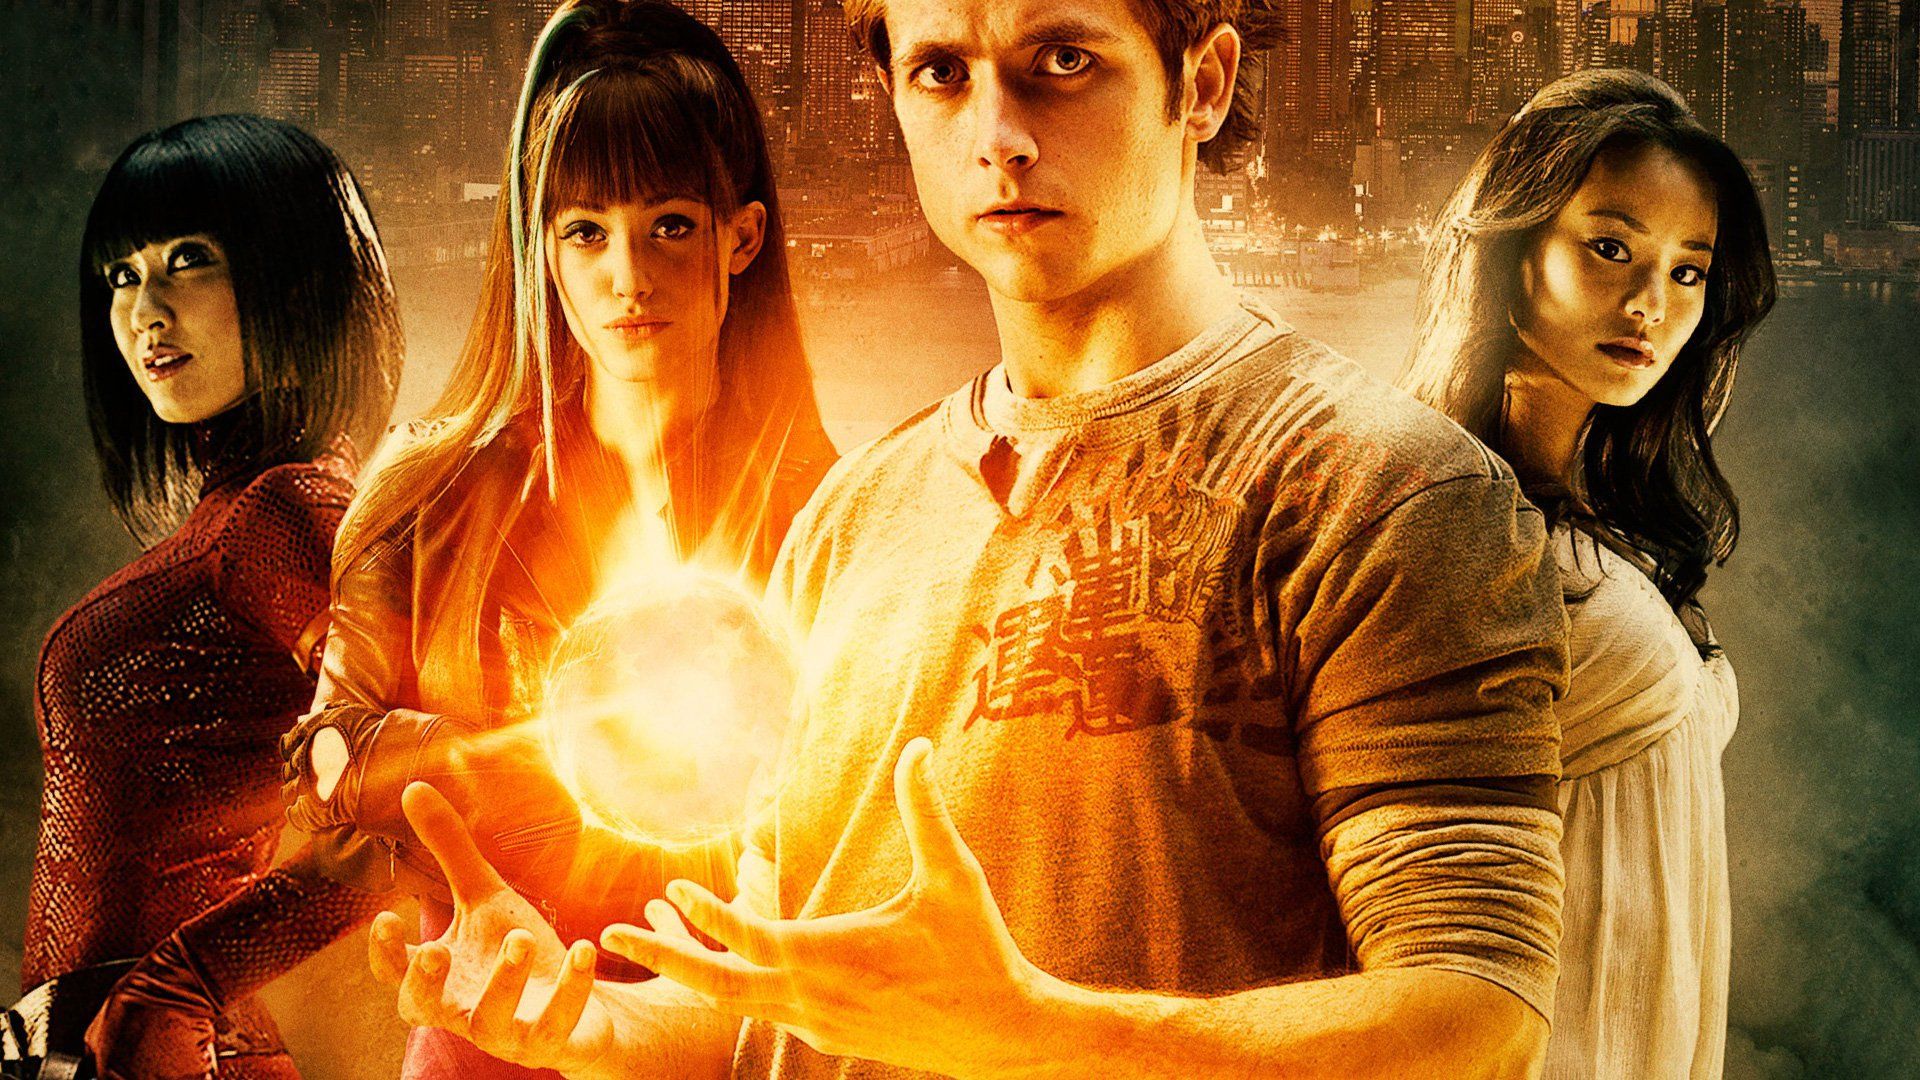 Dragonball Evolution' Writer Apologizes to Fans for the Poorly Received Film